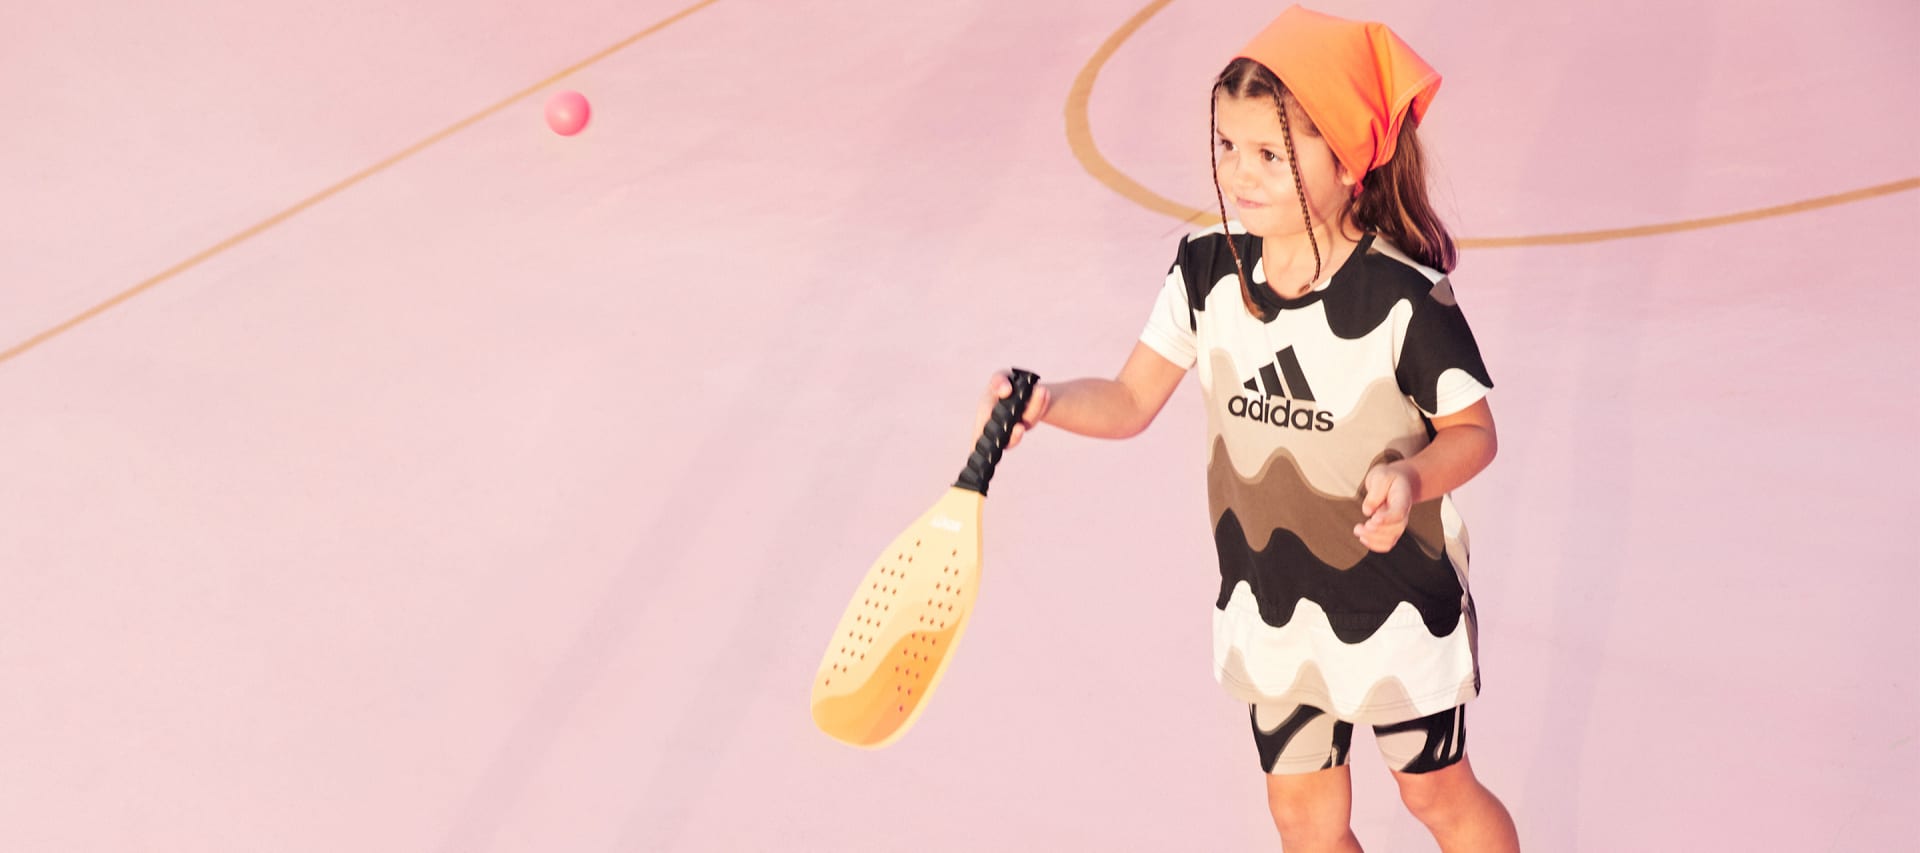 Little kid playing with a bat and ball wearing the adidas x marimekko collection.